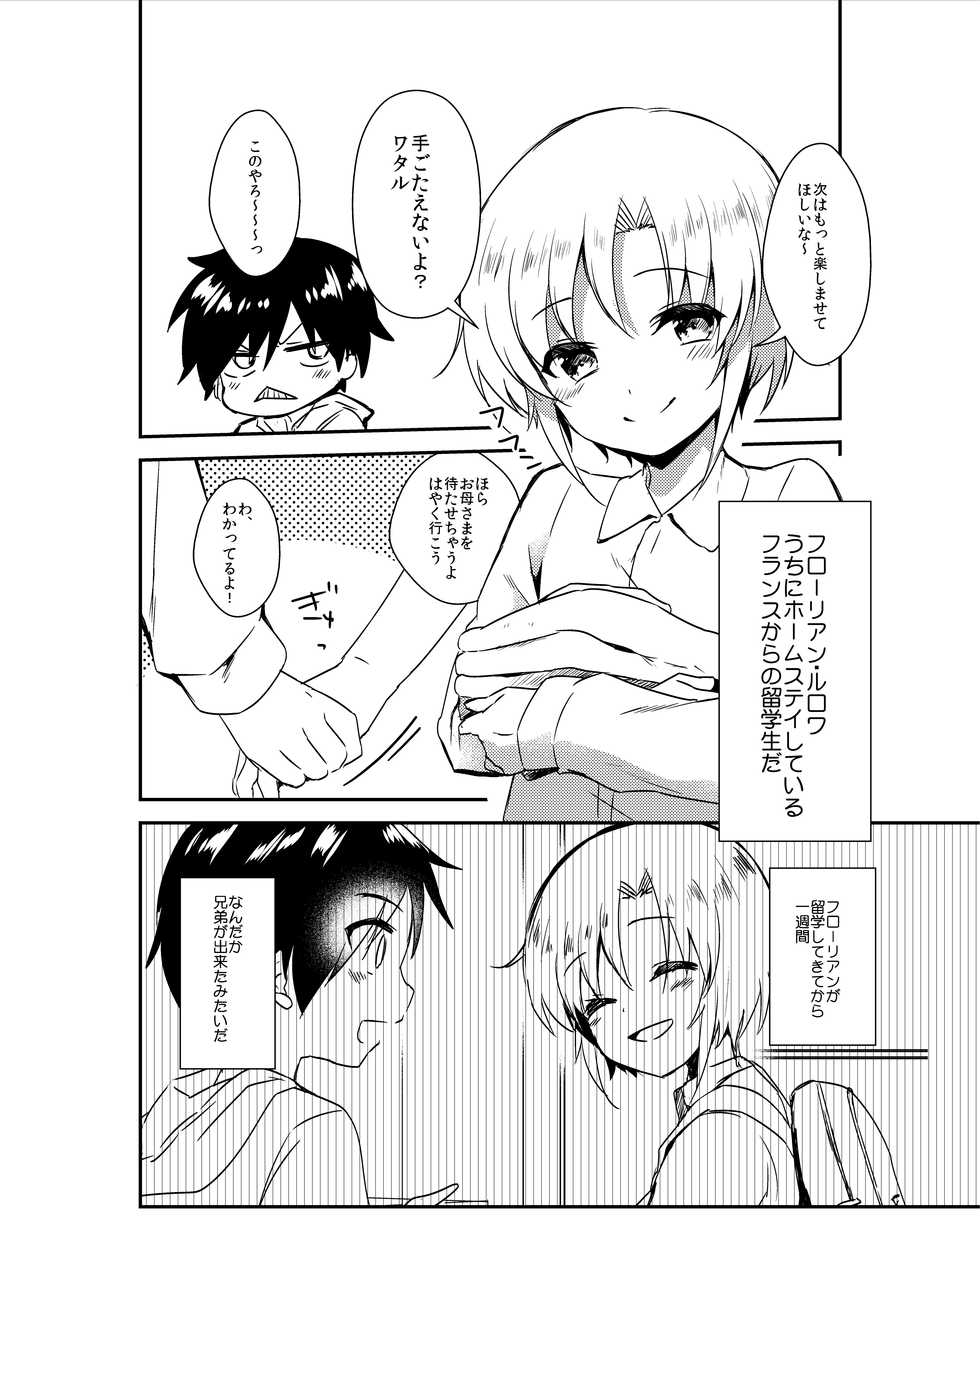 [Commamion, Pfactory (Various)] Shota Sextet 1 [Digital] - Page 37